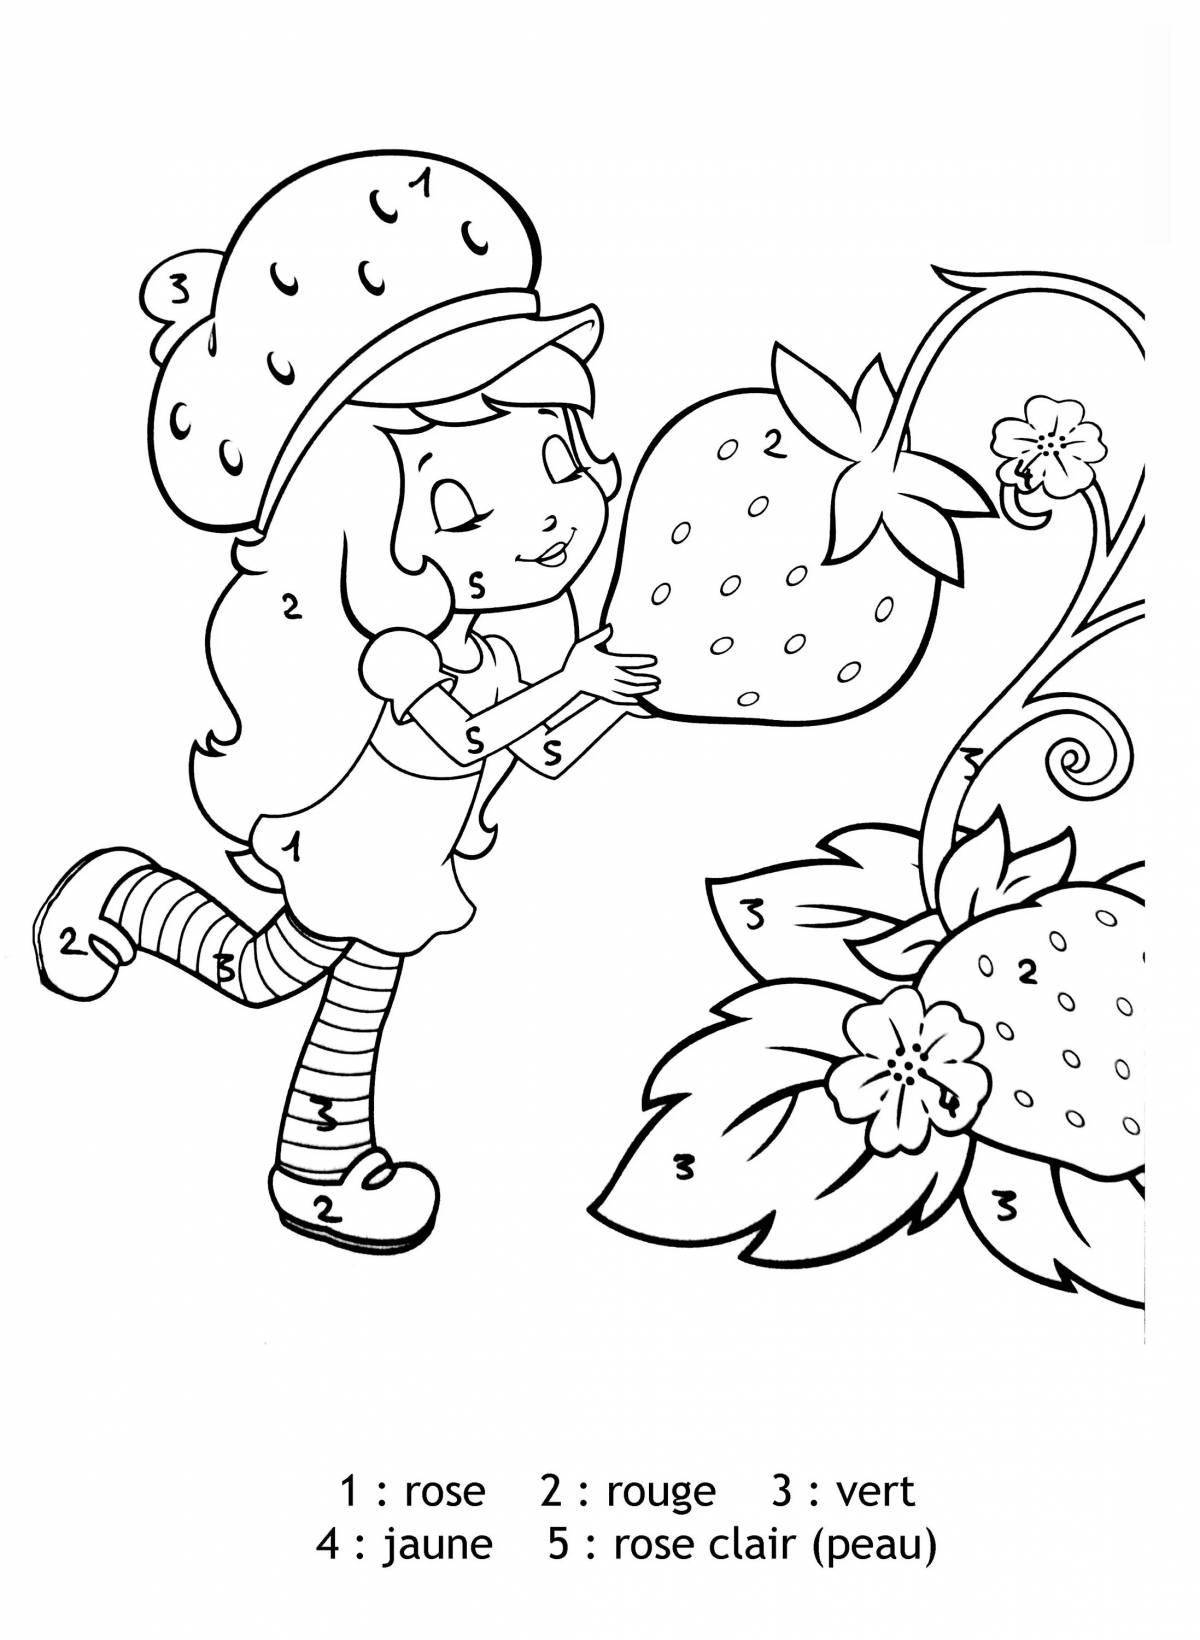 Fascinating strawberry coloring game